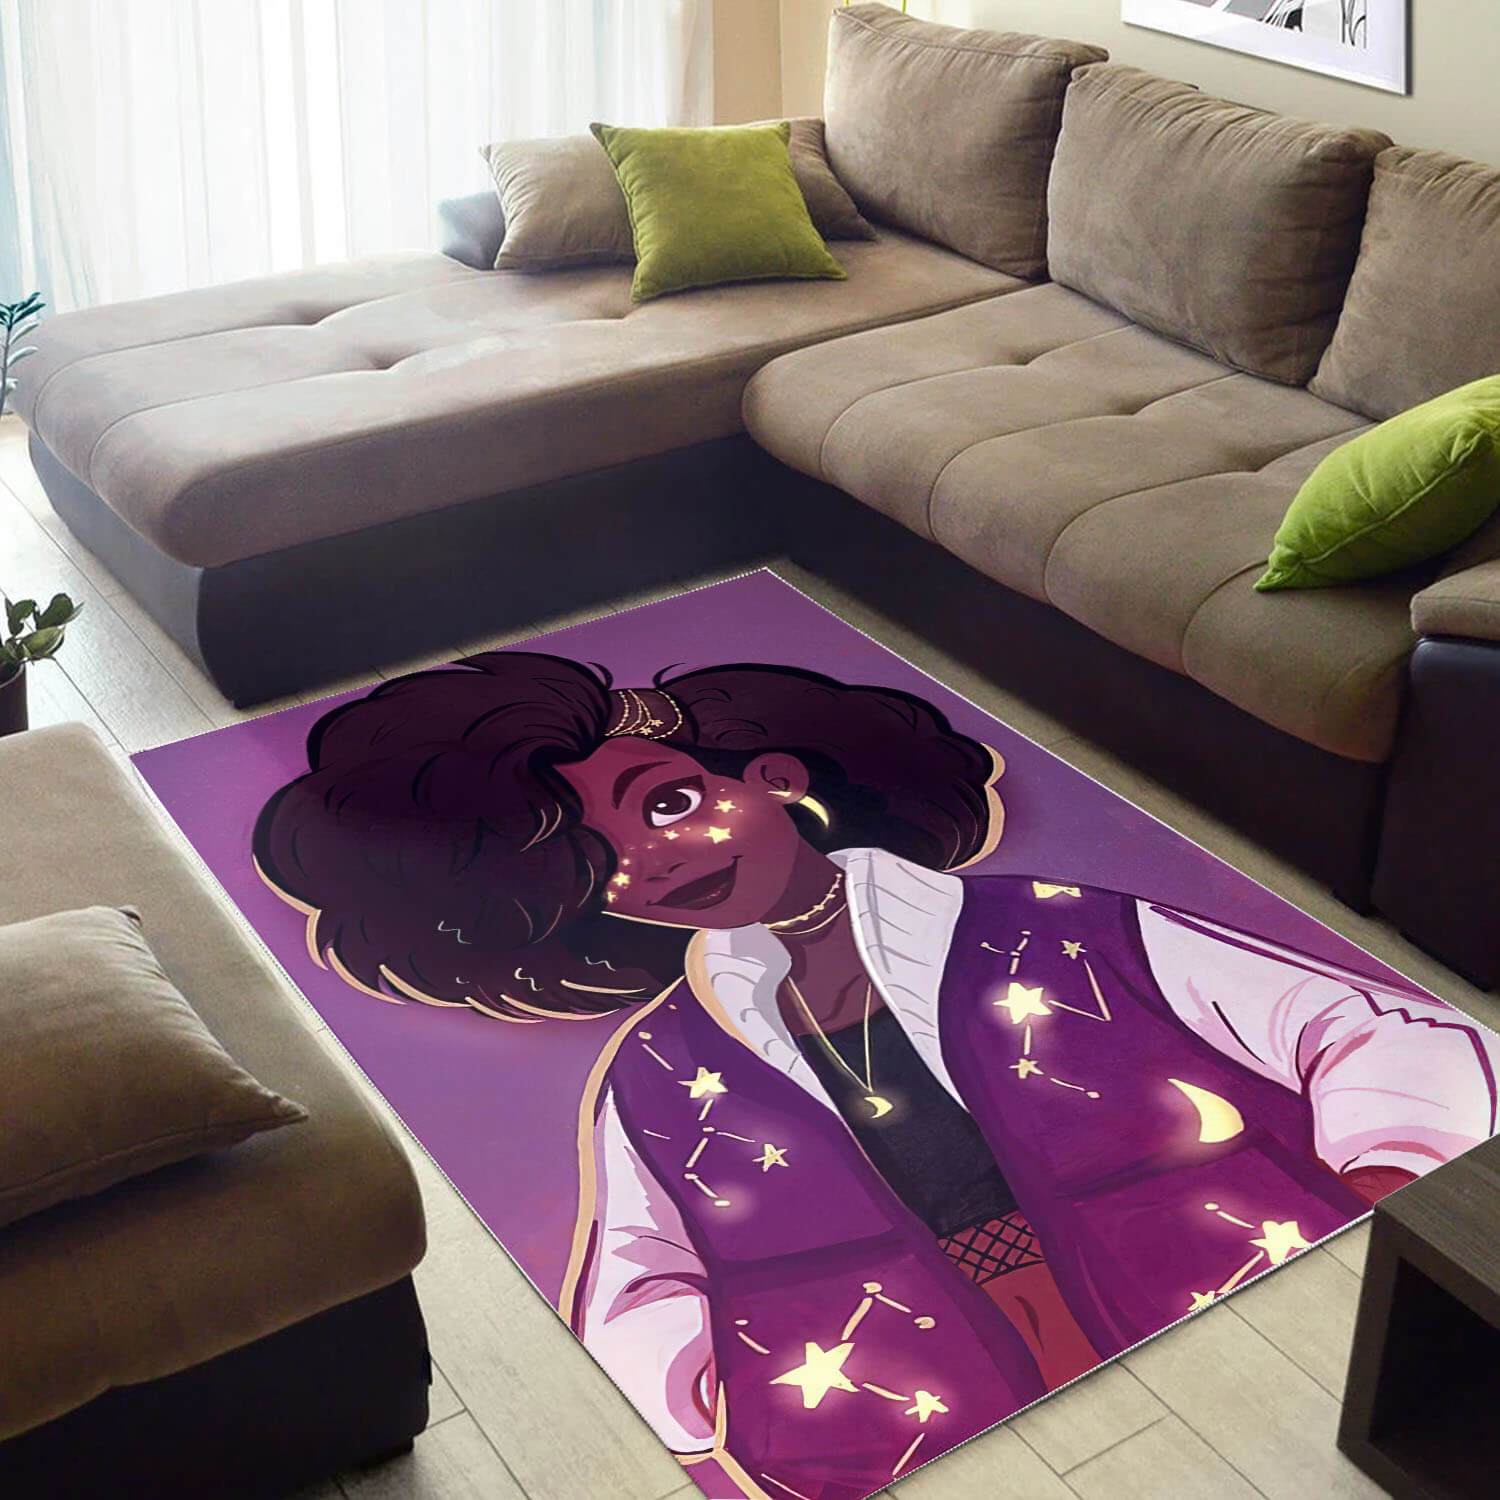 African American Area Rugs Beautiful Lady With Afro African Themed Area Rugs Afrocentric Home Decor And Style WBG02581